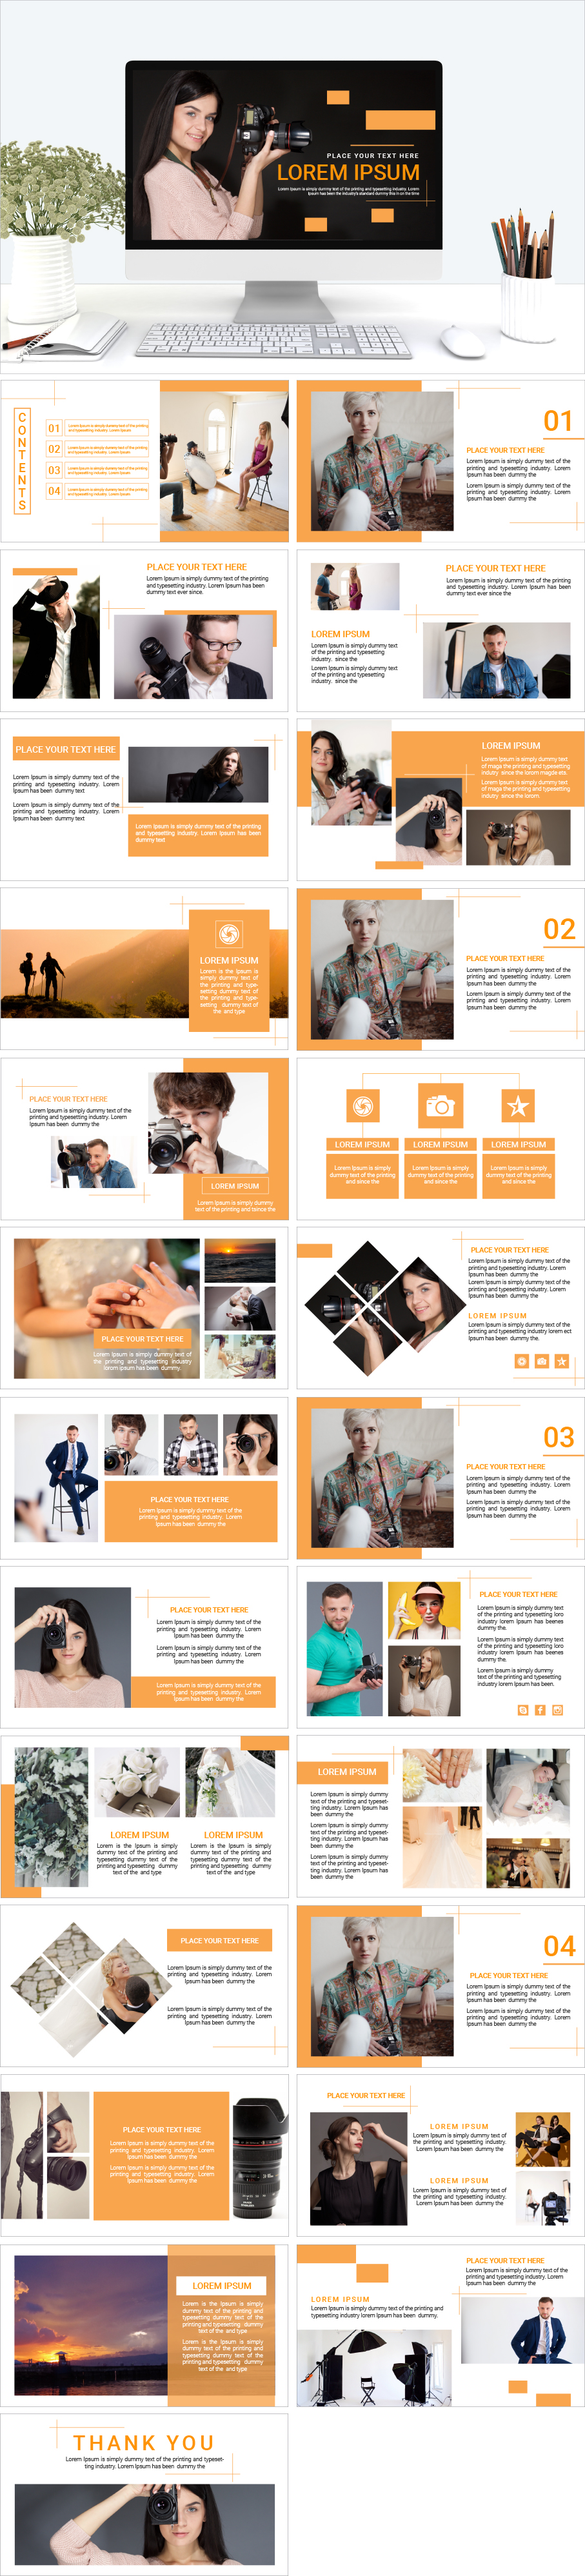 PowerPoint template material vol.2